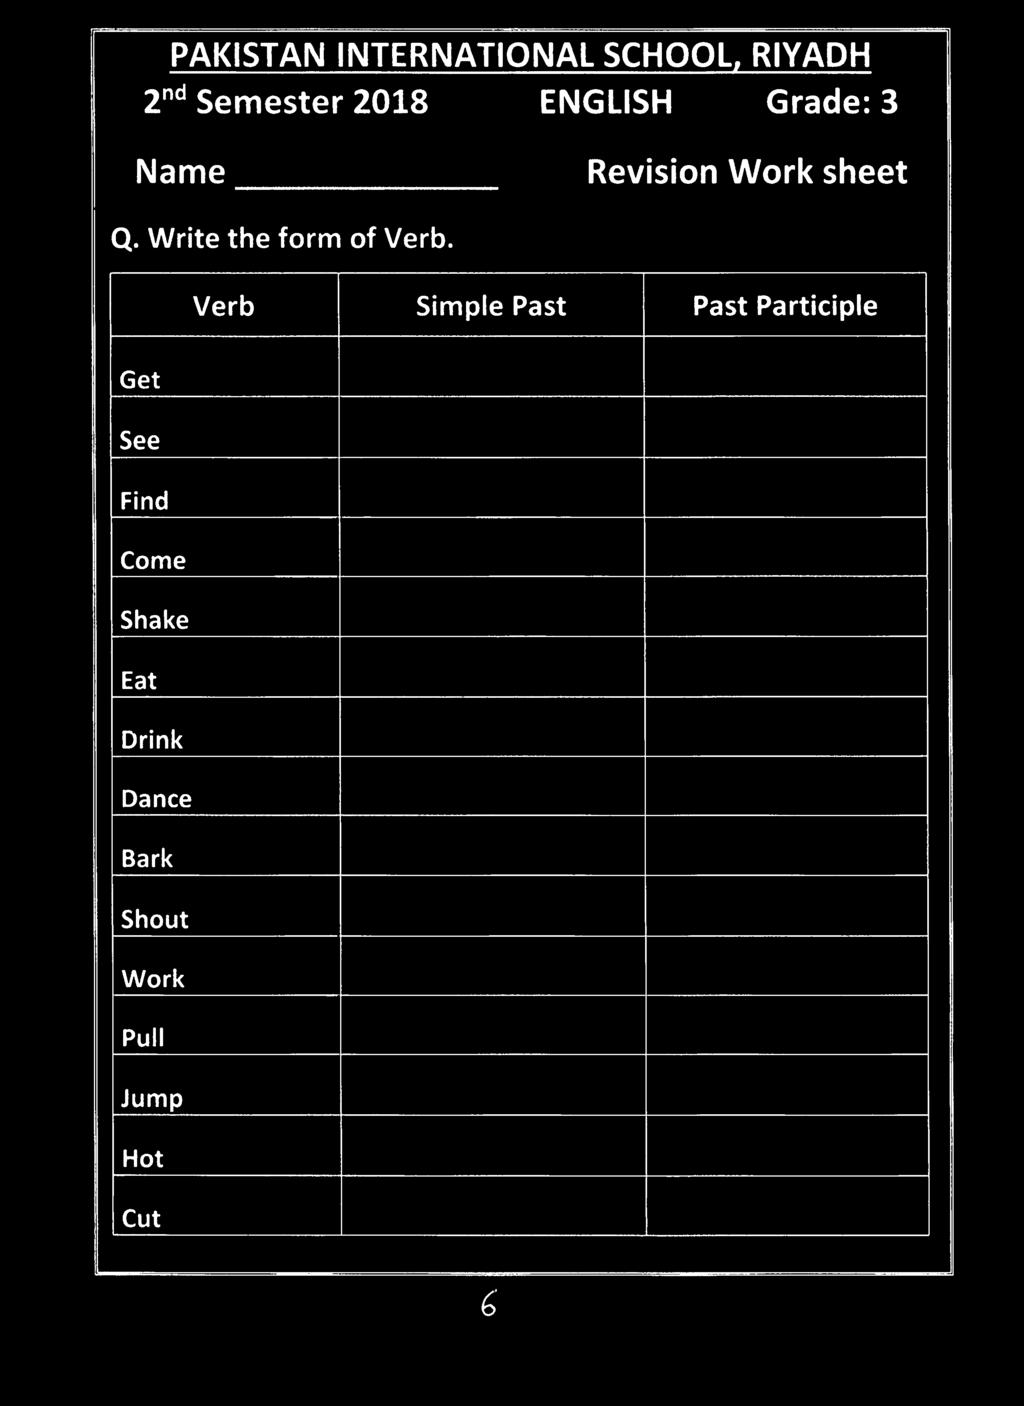 Write the form of Verb.